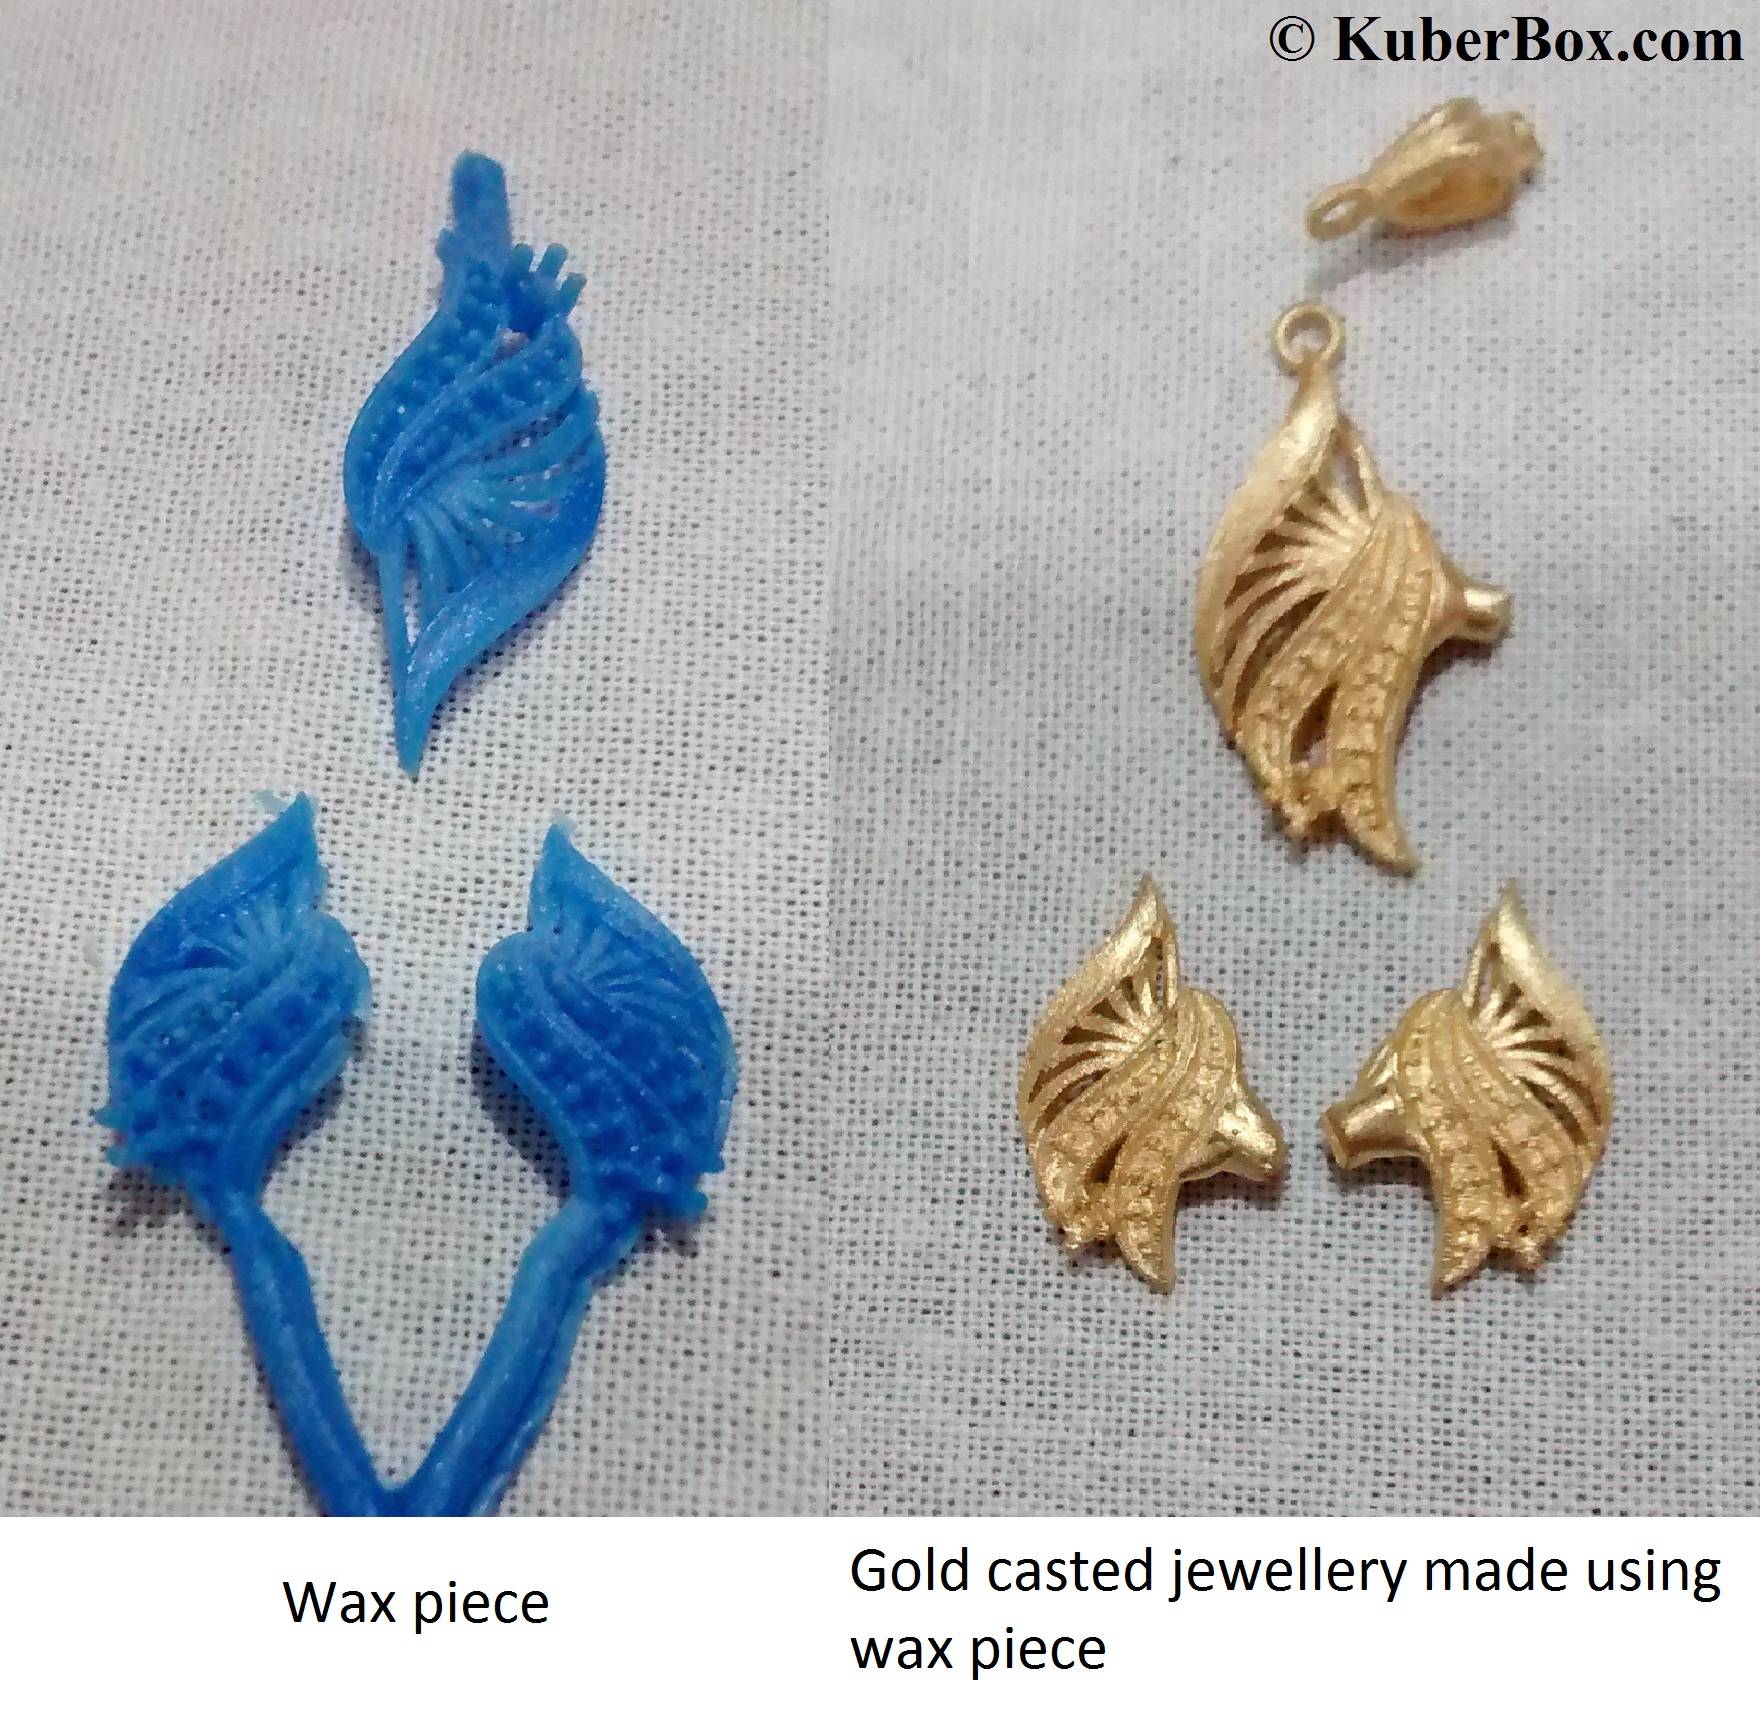 Casted gold jewellery from wax